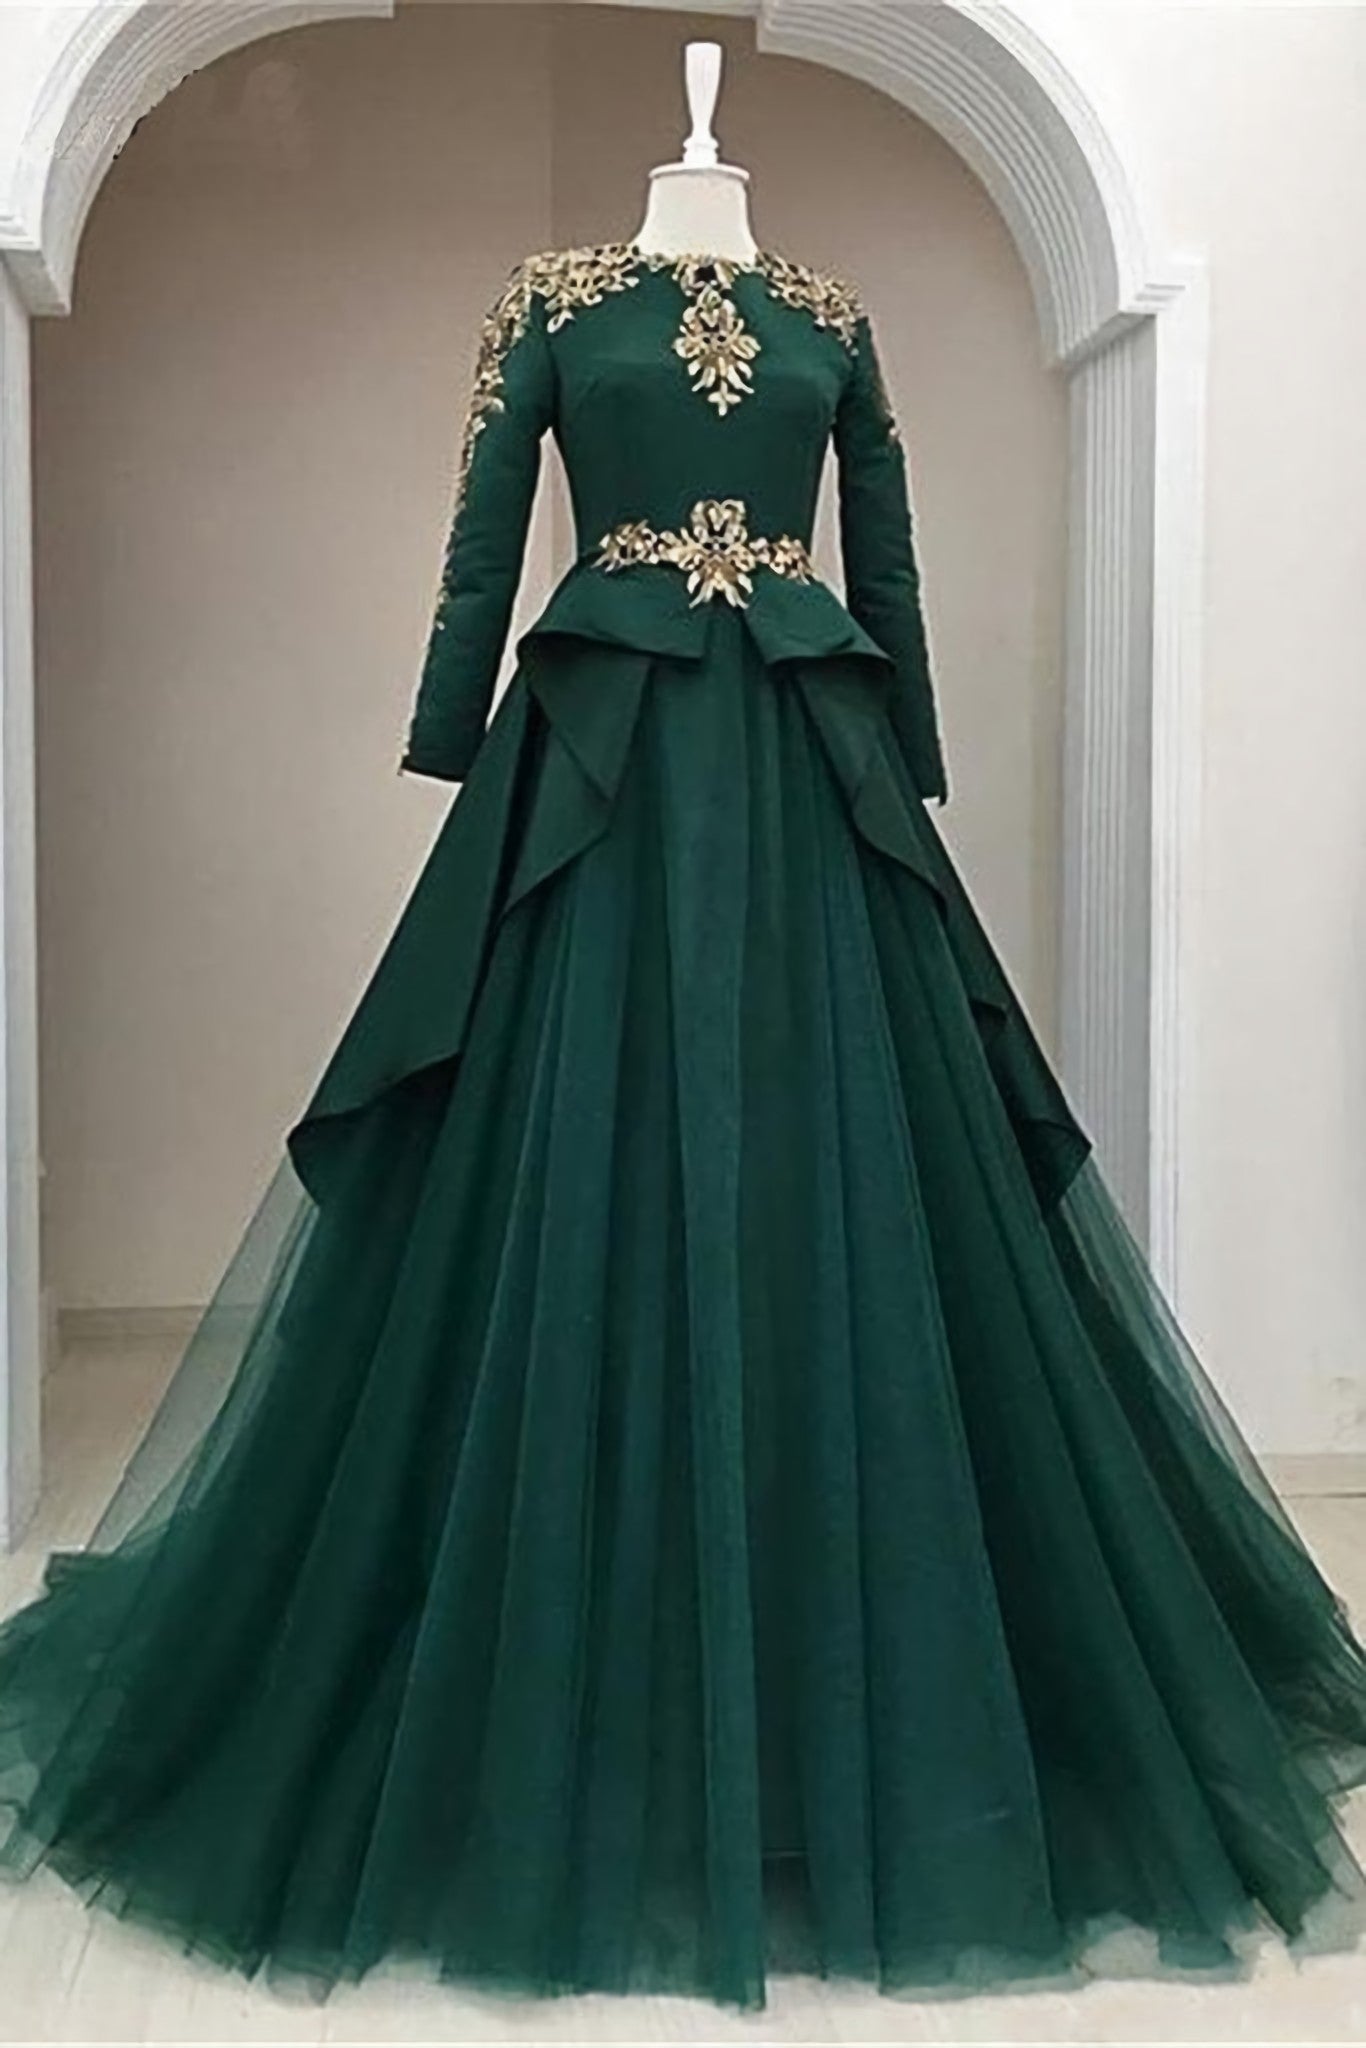 Dark Green Satin Tulle O Neck Long Sleeve Arabic Corset Formal Corset Prom Dress, With Applique Gowns, Homecoming Dresses Chiffon